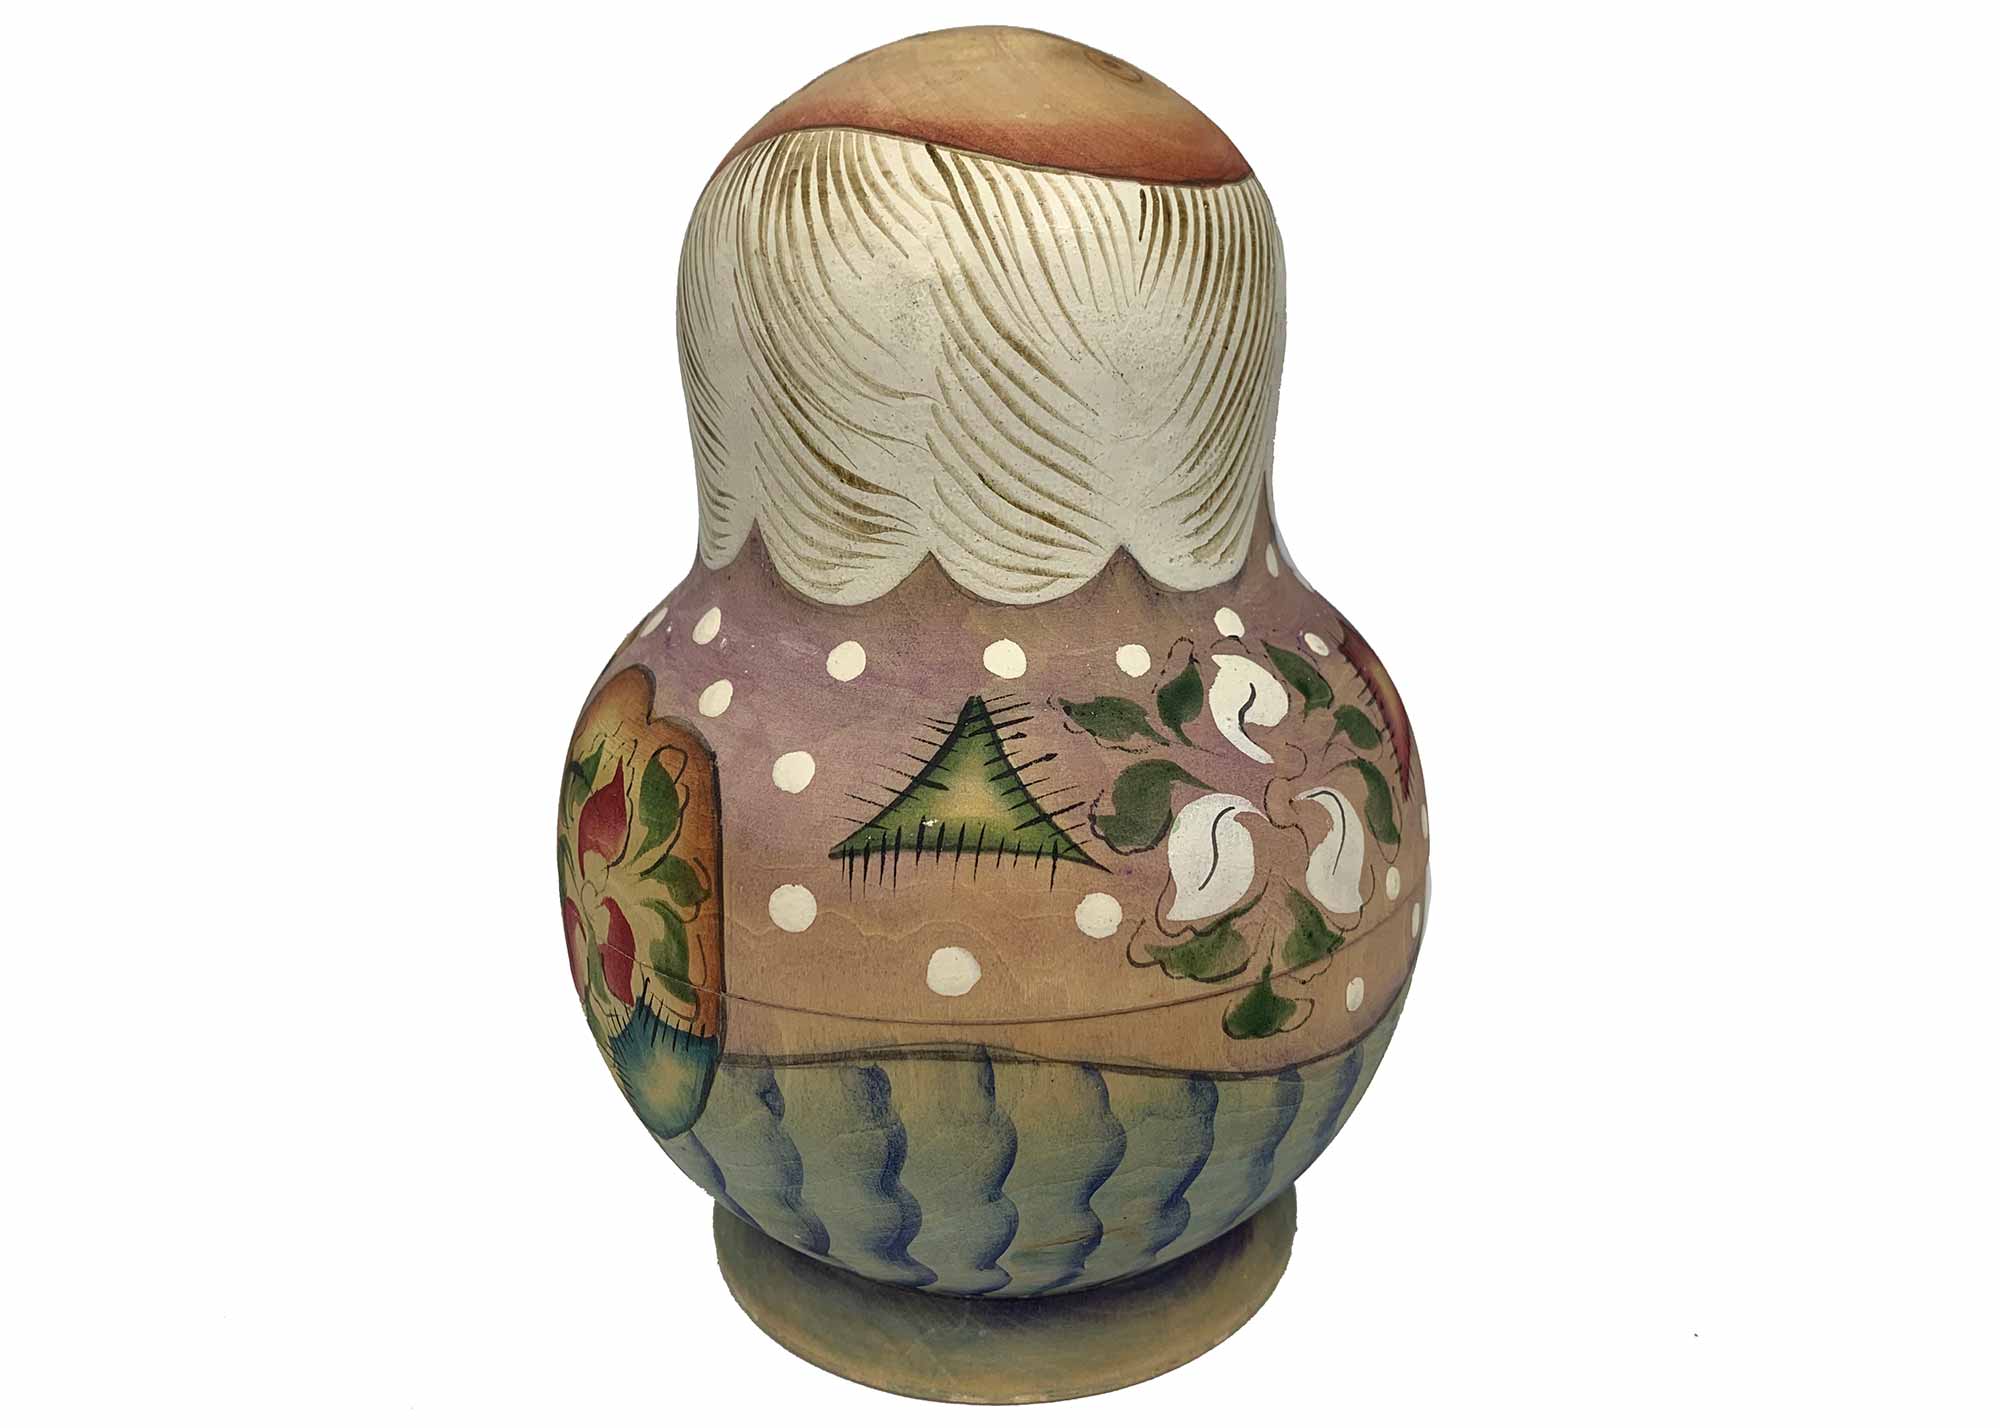 Buy Imperfect Vintage "In the Home" Peasant Man Nesting Doll 10pc./7" at GoldenCockerel.com